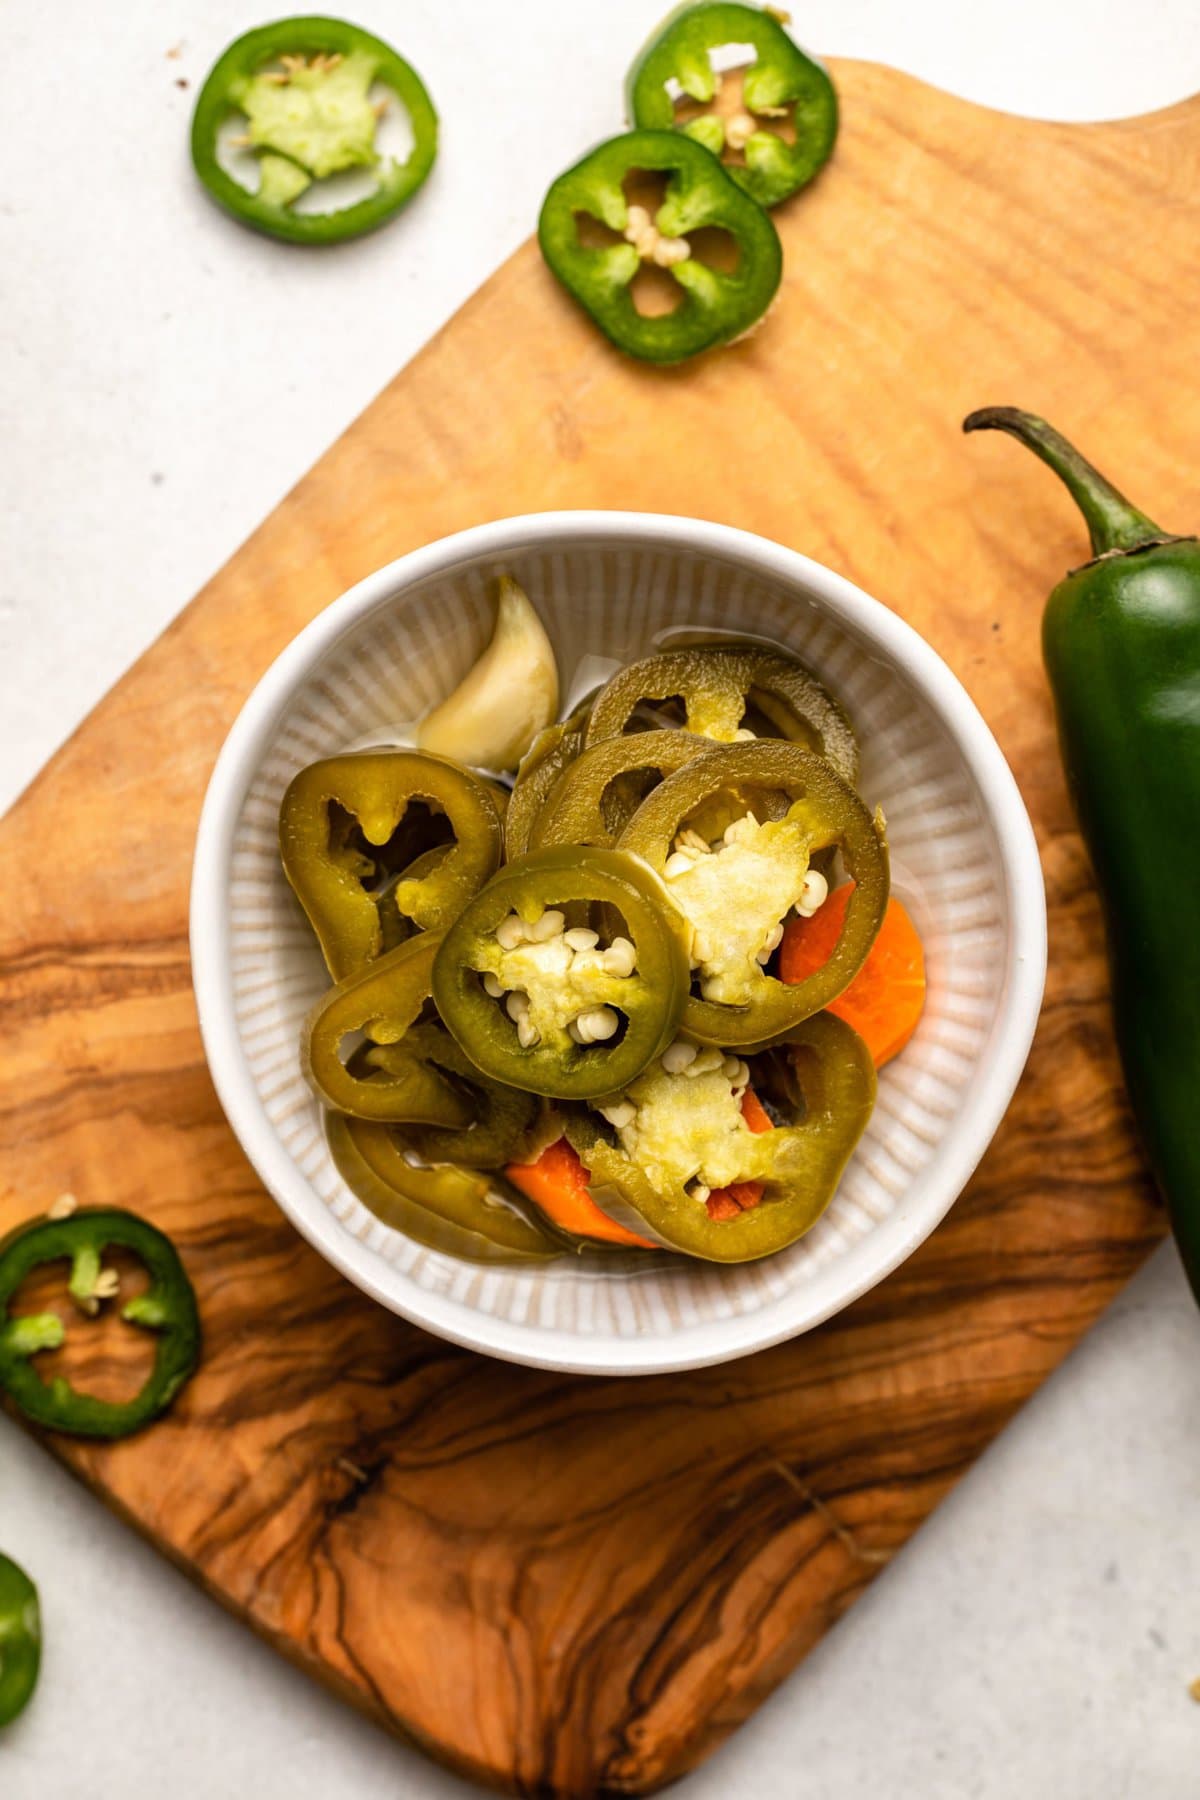 Pickled jalapeños with carrots and garlic in a small white bowl, on a wood cutting board